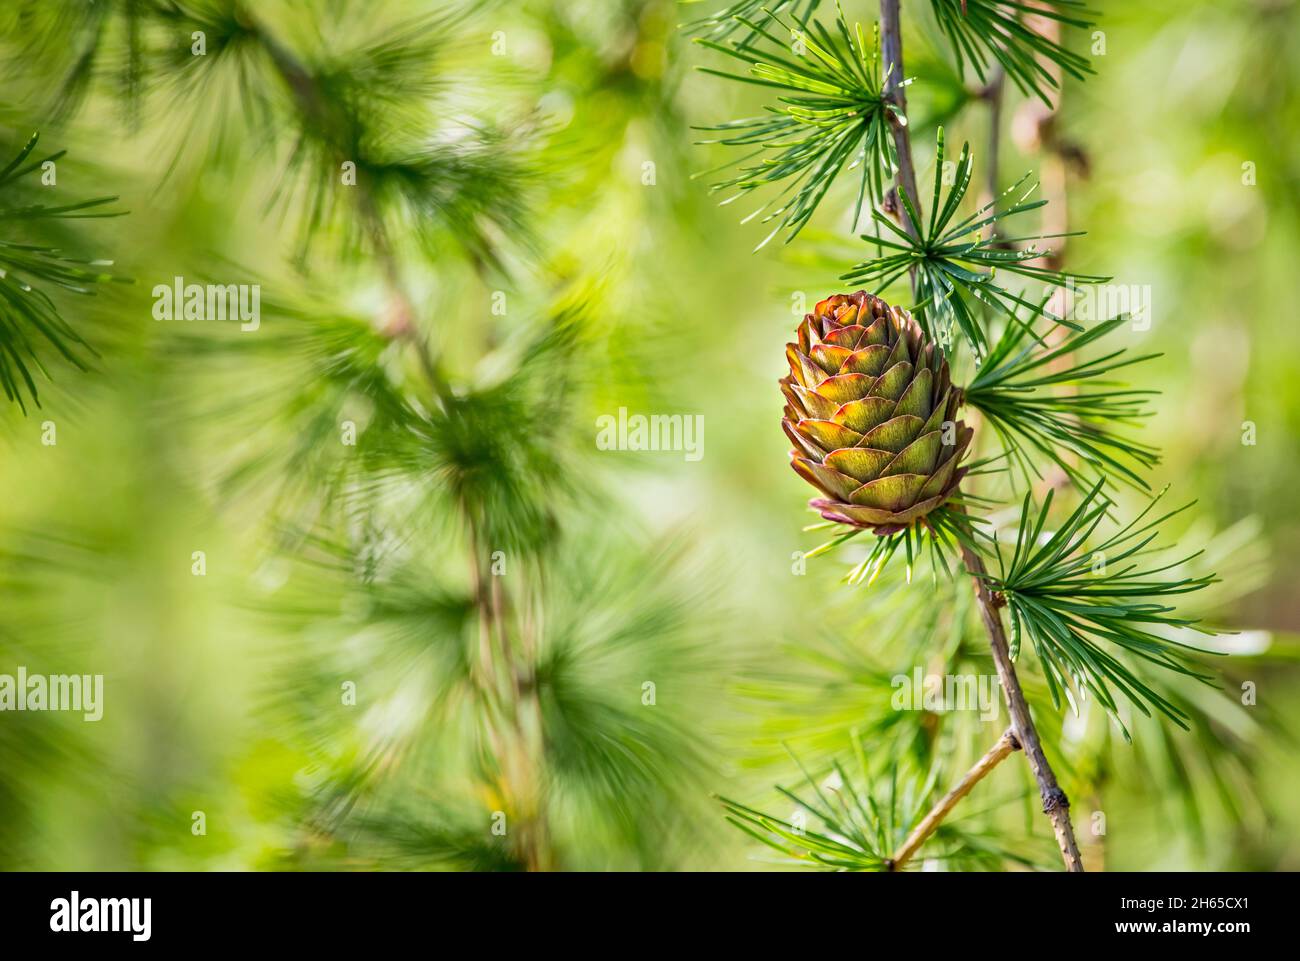 Larix gmelinii or the Dahurian larch. Cones on a coniferous tree. Stock Photo